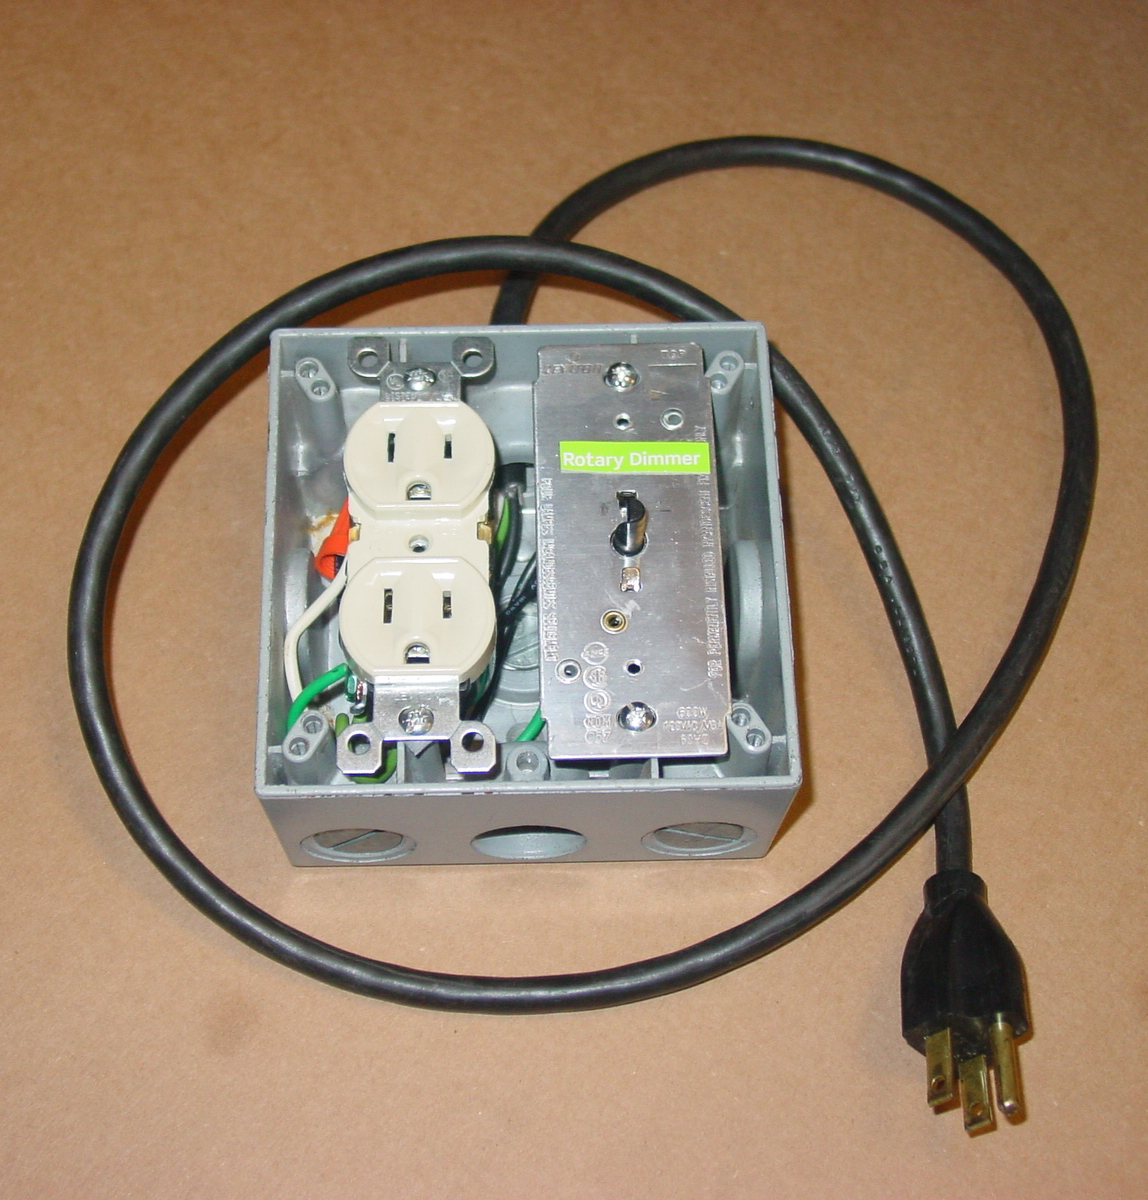 Dimmer assembly